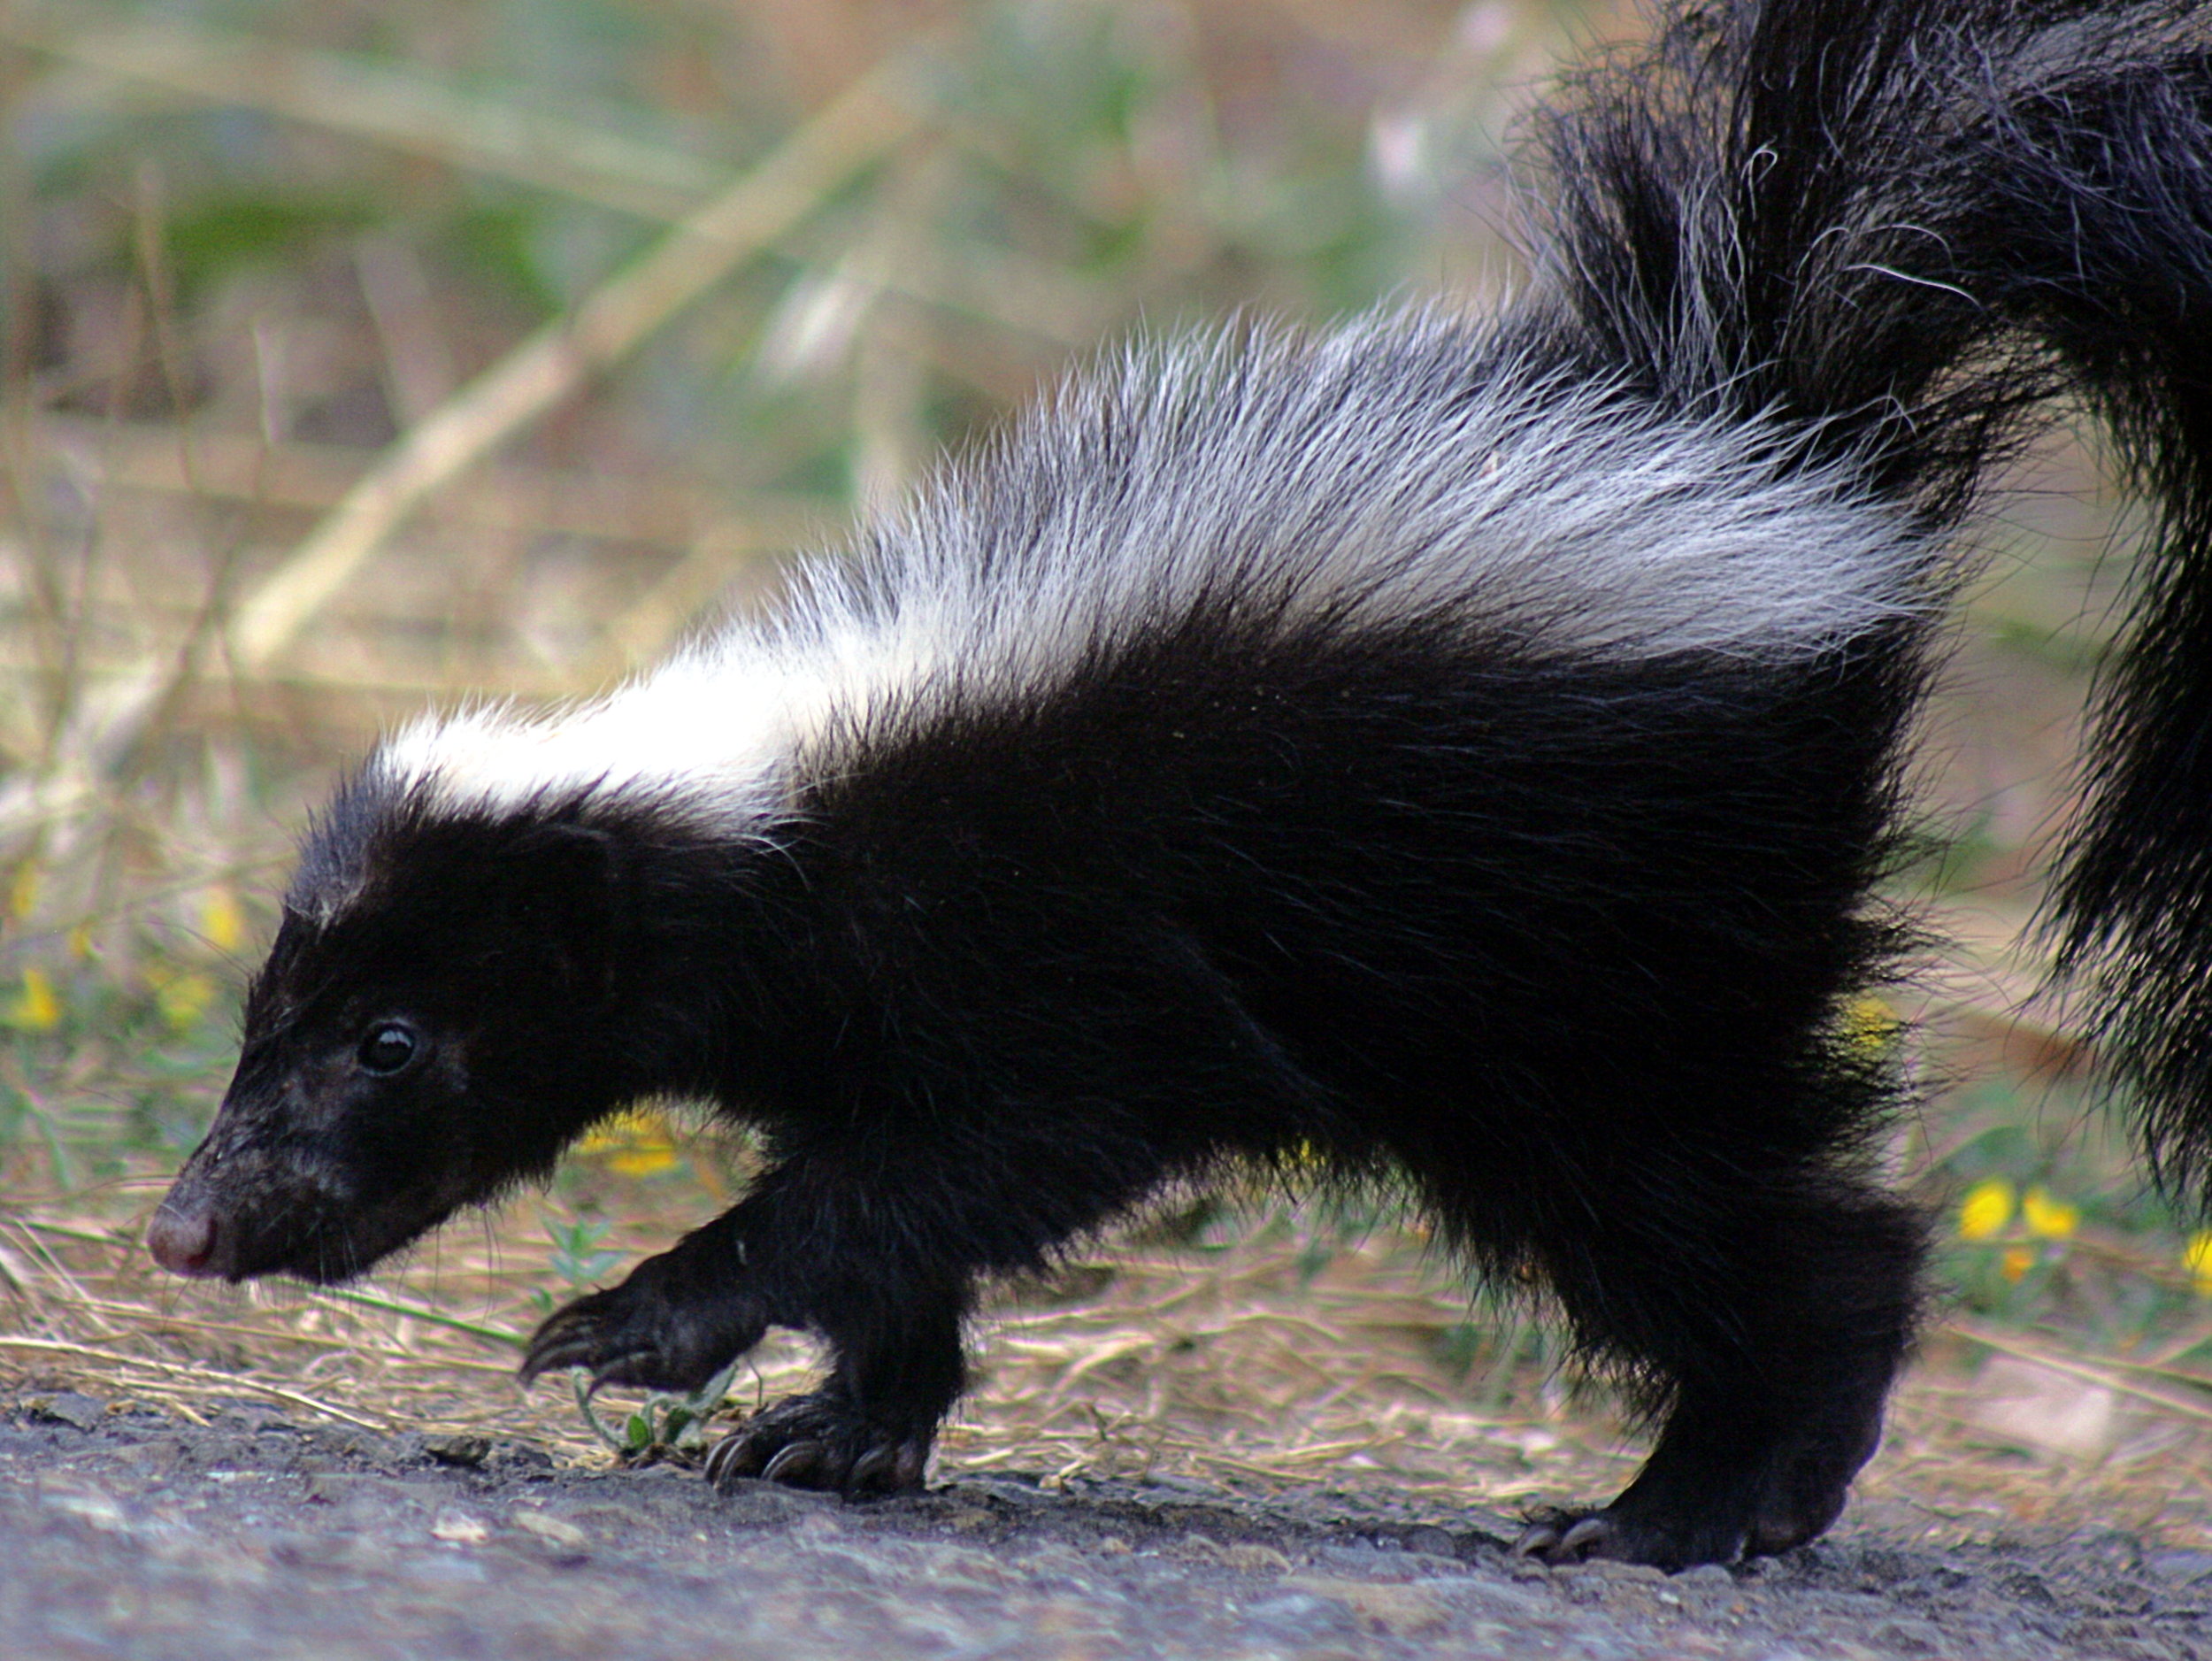   Eggs are one of striped skunks’ favorite snacks. Photo by TJ Gehling  